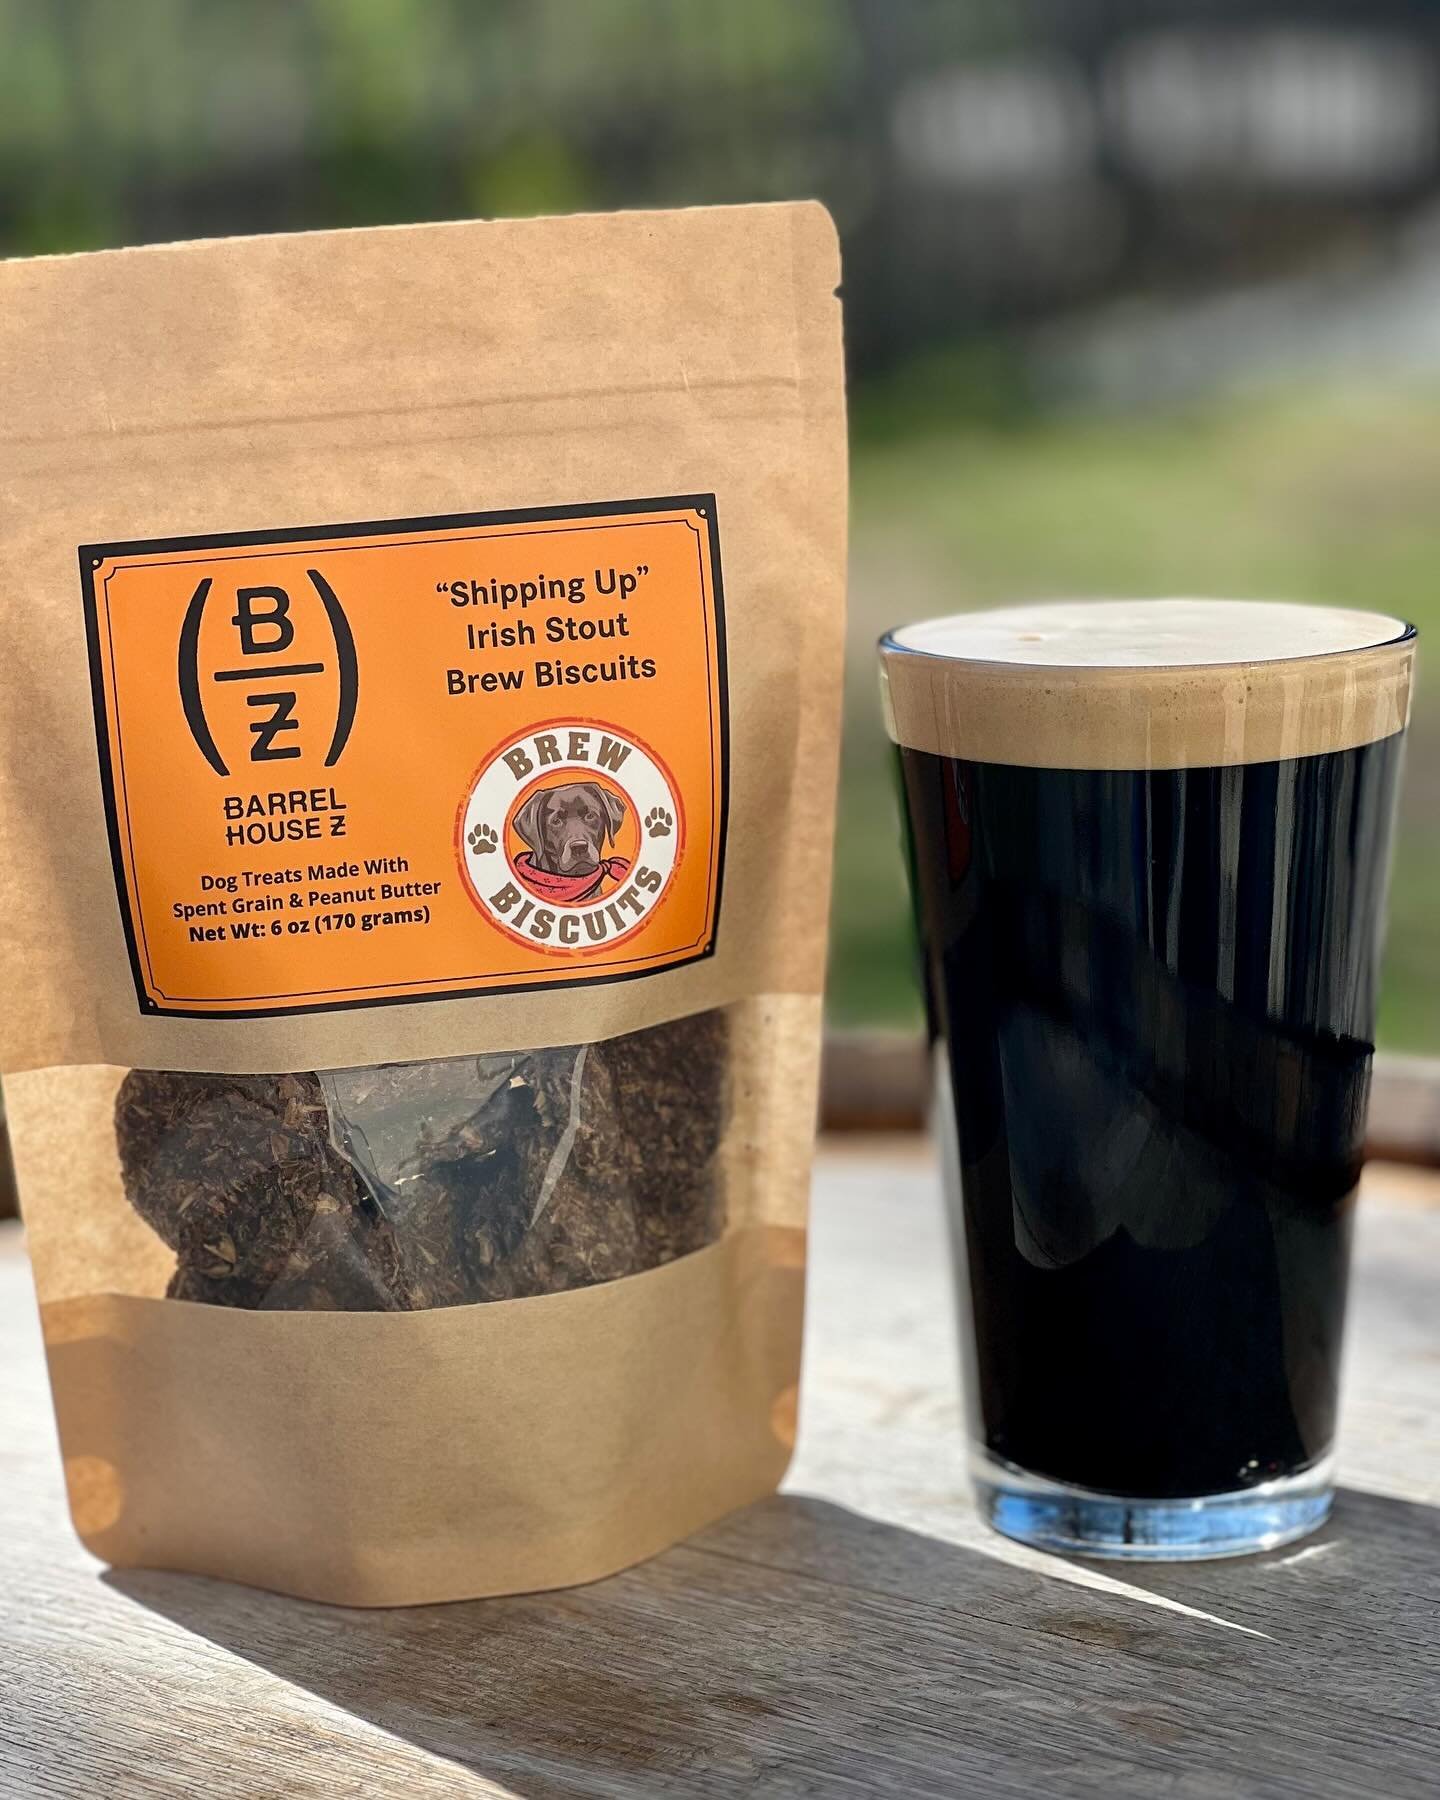 Every good pups favorite treat 🐾 &ldquo;Shipping Up&rdquo; Irish Stout by @brew_biscuits_ma are available now in the taproom!  Made with spent grain &amp; peanut butter.

Save a treat &amp; the date for our May 11th Dog Adoption event with @lasthope